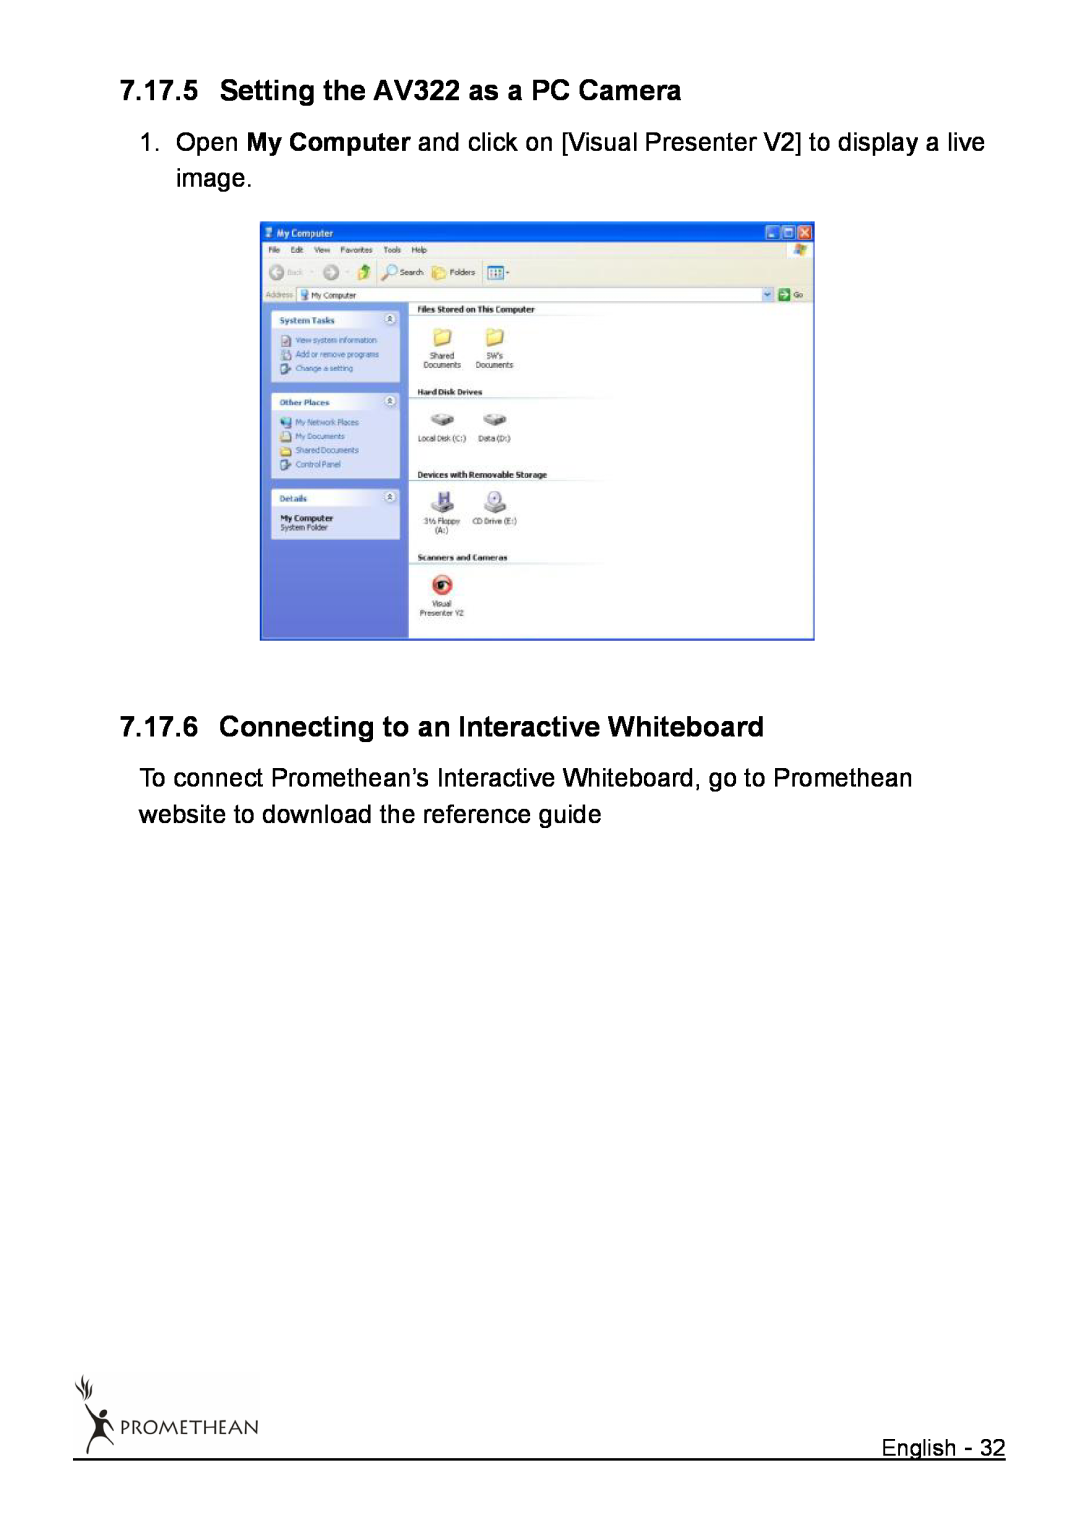 Promethean user manual Setting the AV322 as a PC Camera, Connecting to an Interactive Whiteboard 